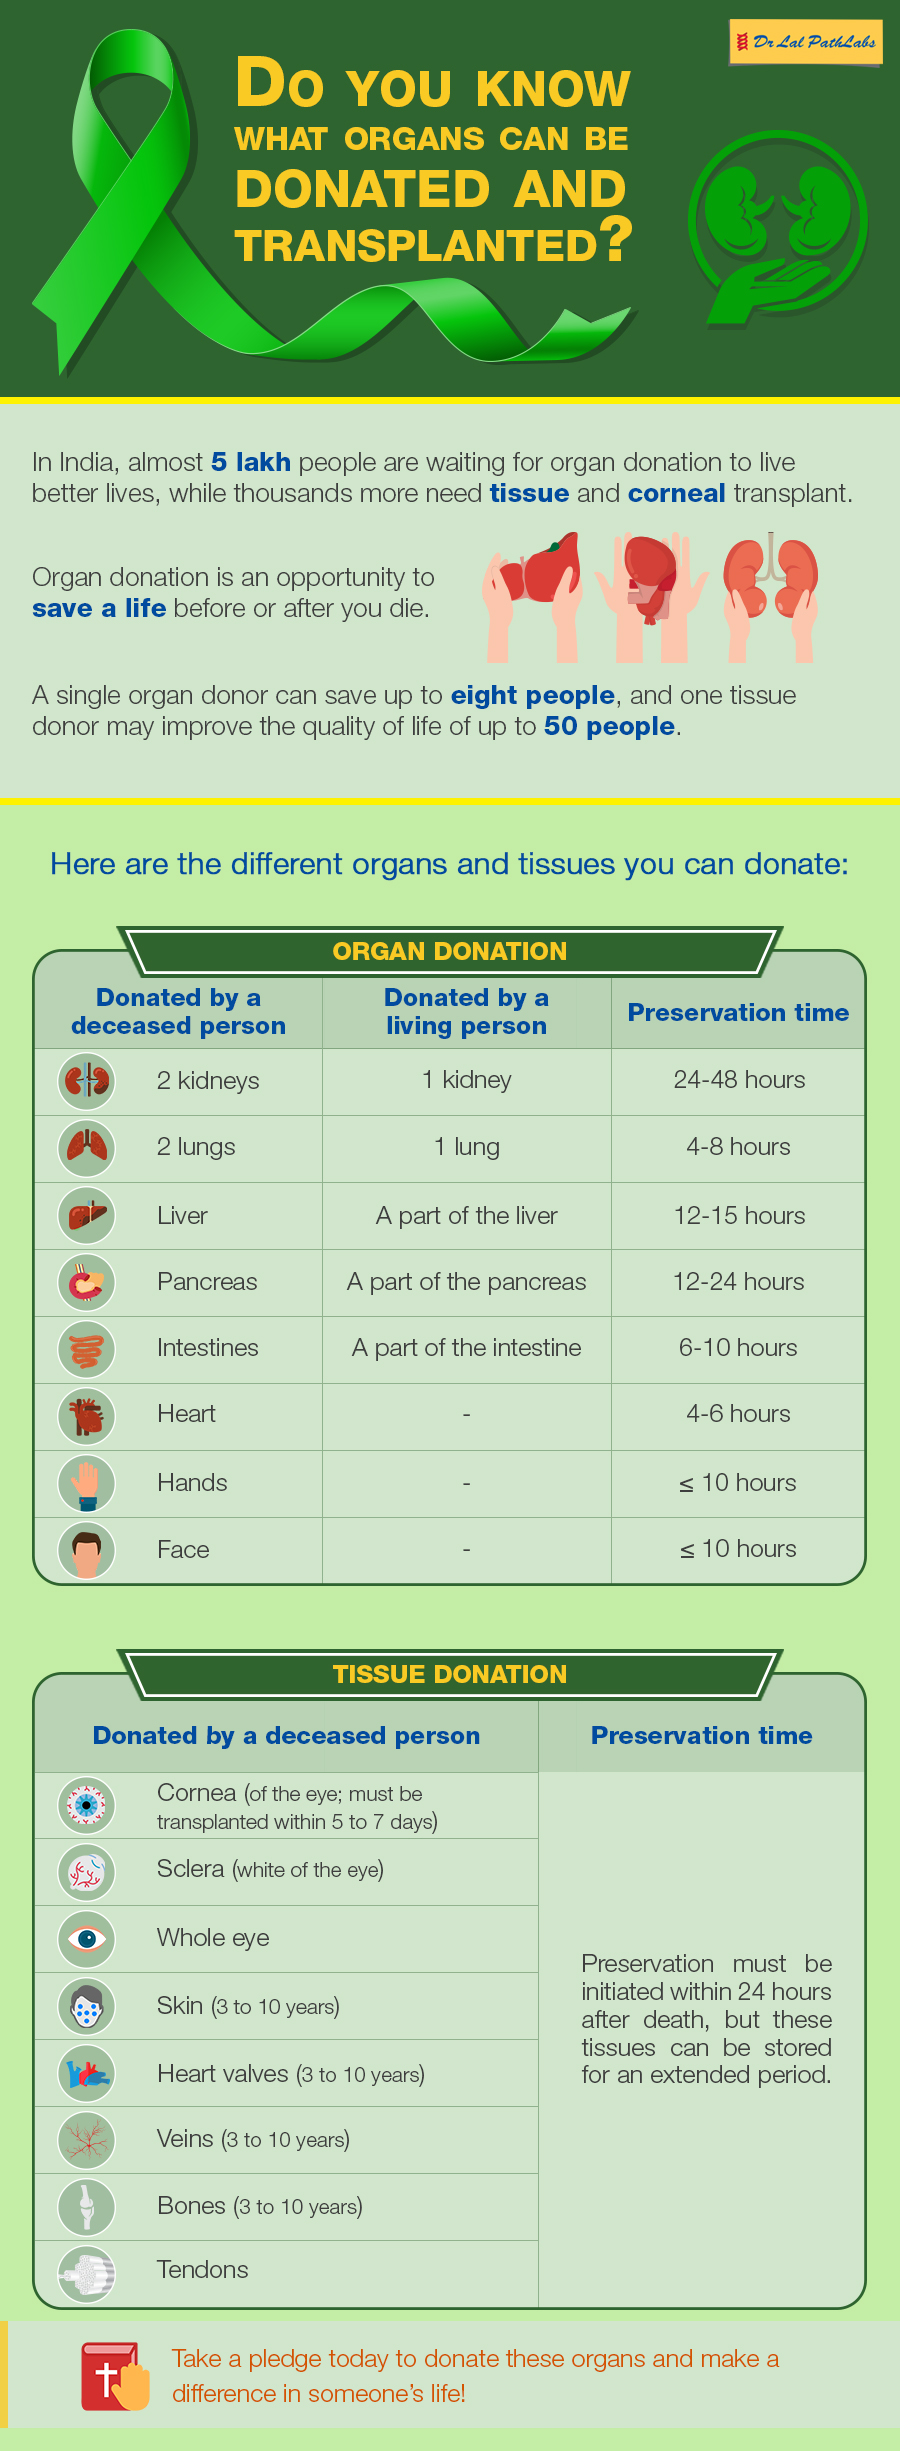 Organs can be donated and transplanted